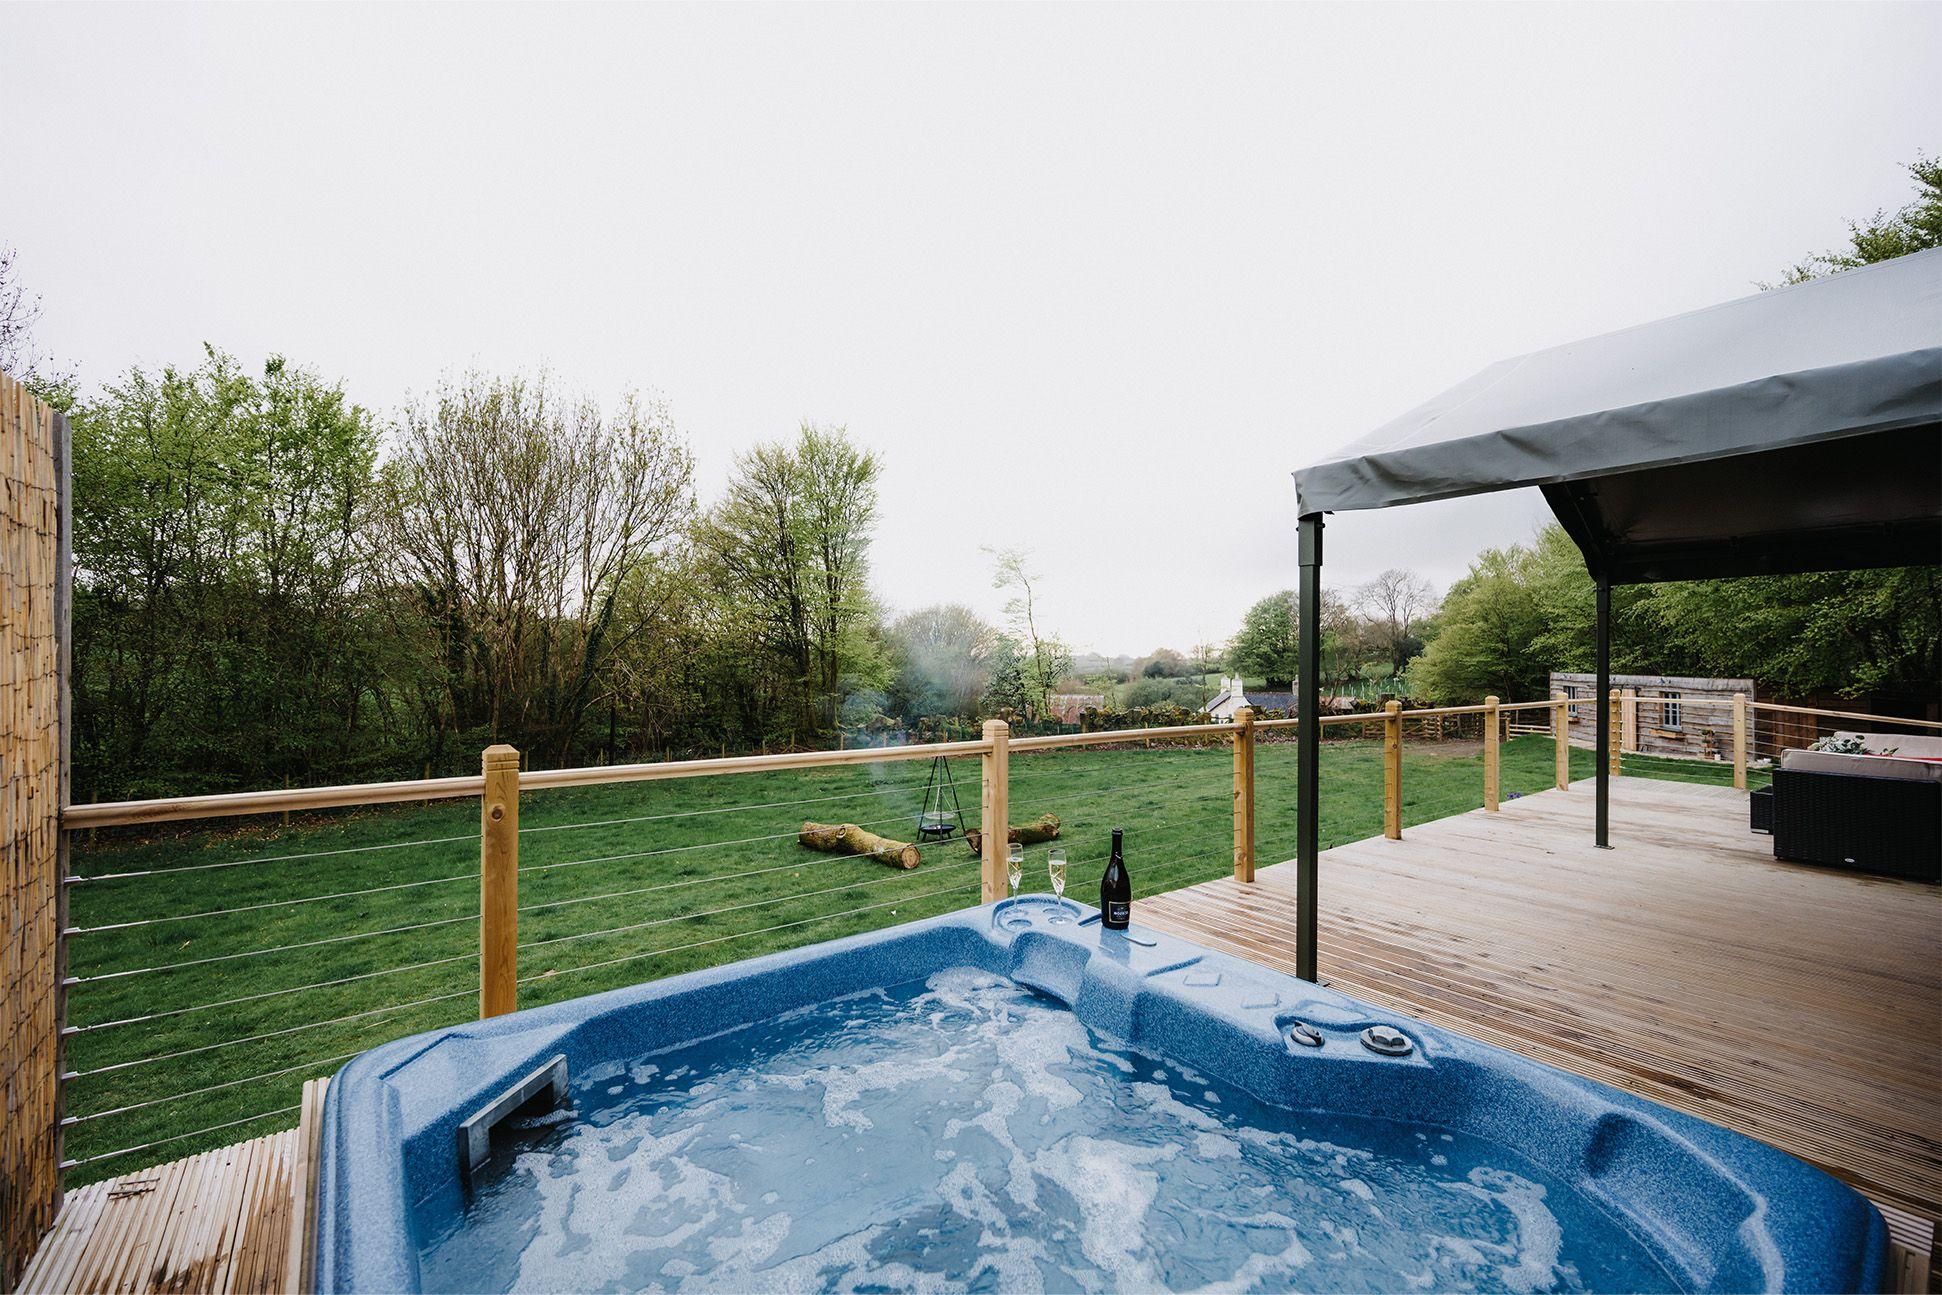  Flora & Fauna decking with hot tub and view of countryside 